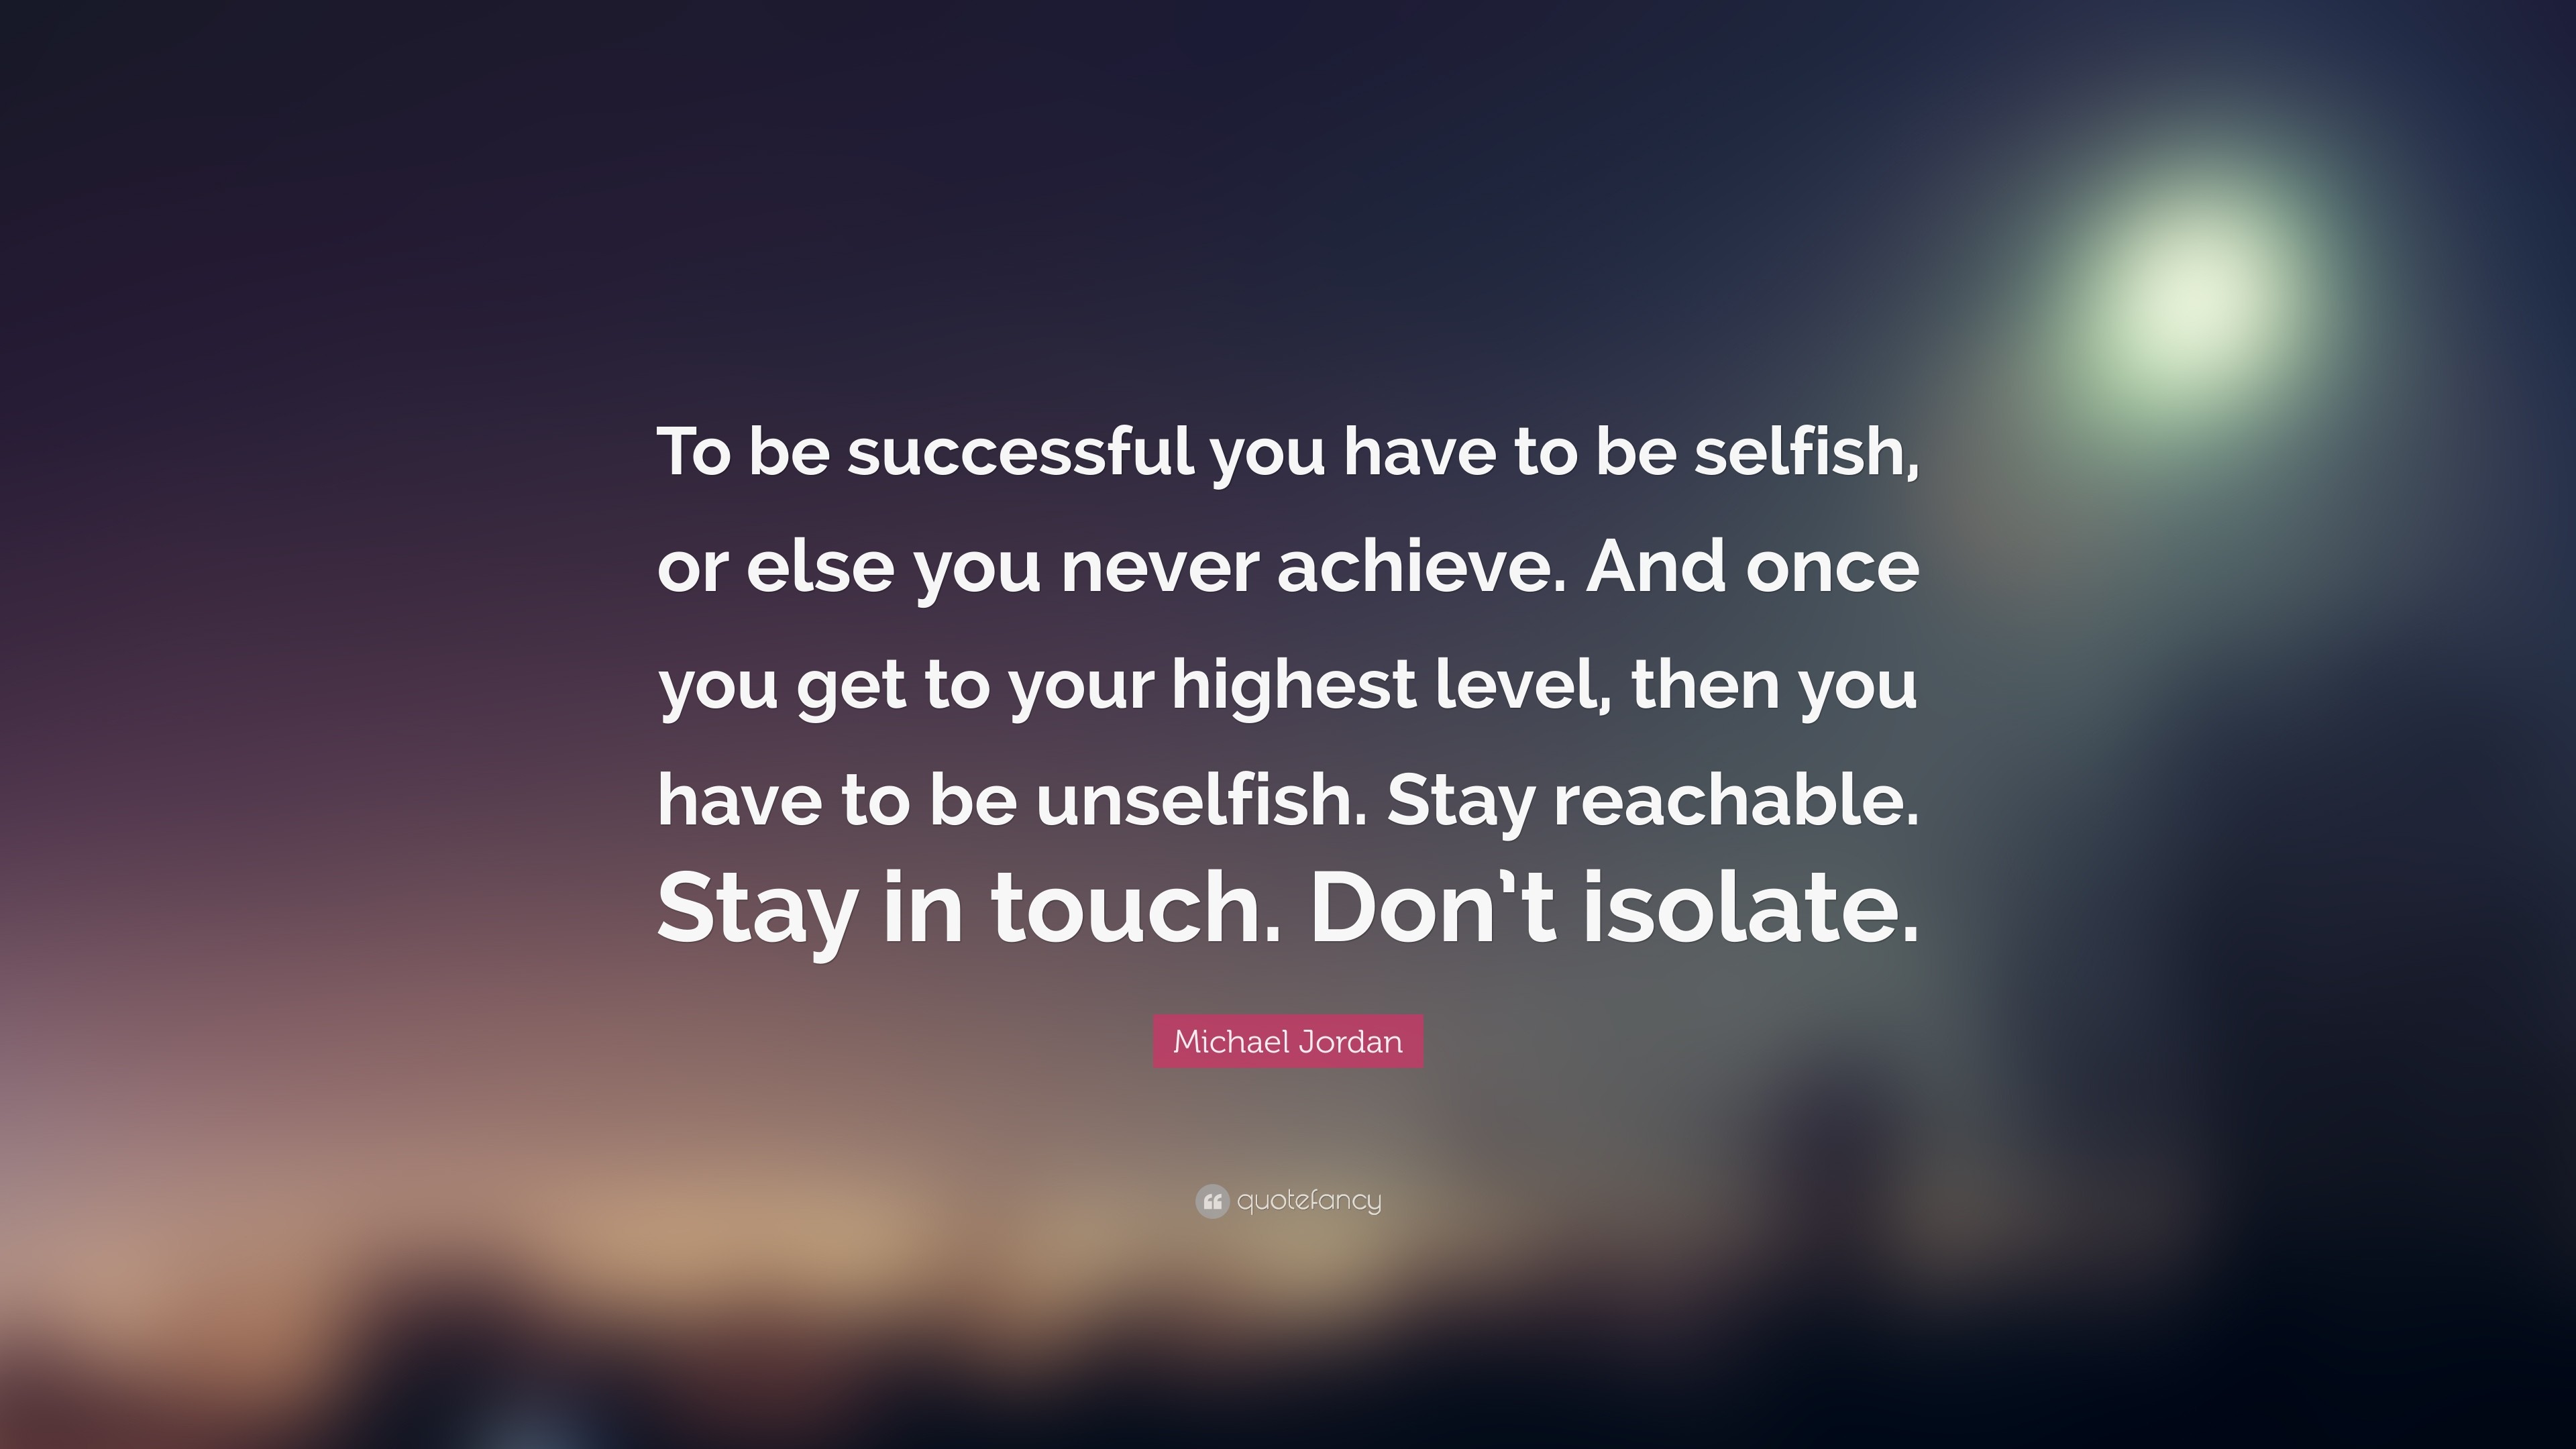 3840x2160 Basketball Quotes: “To be successful you have to be selfish, or else you